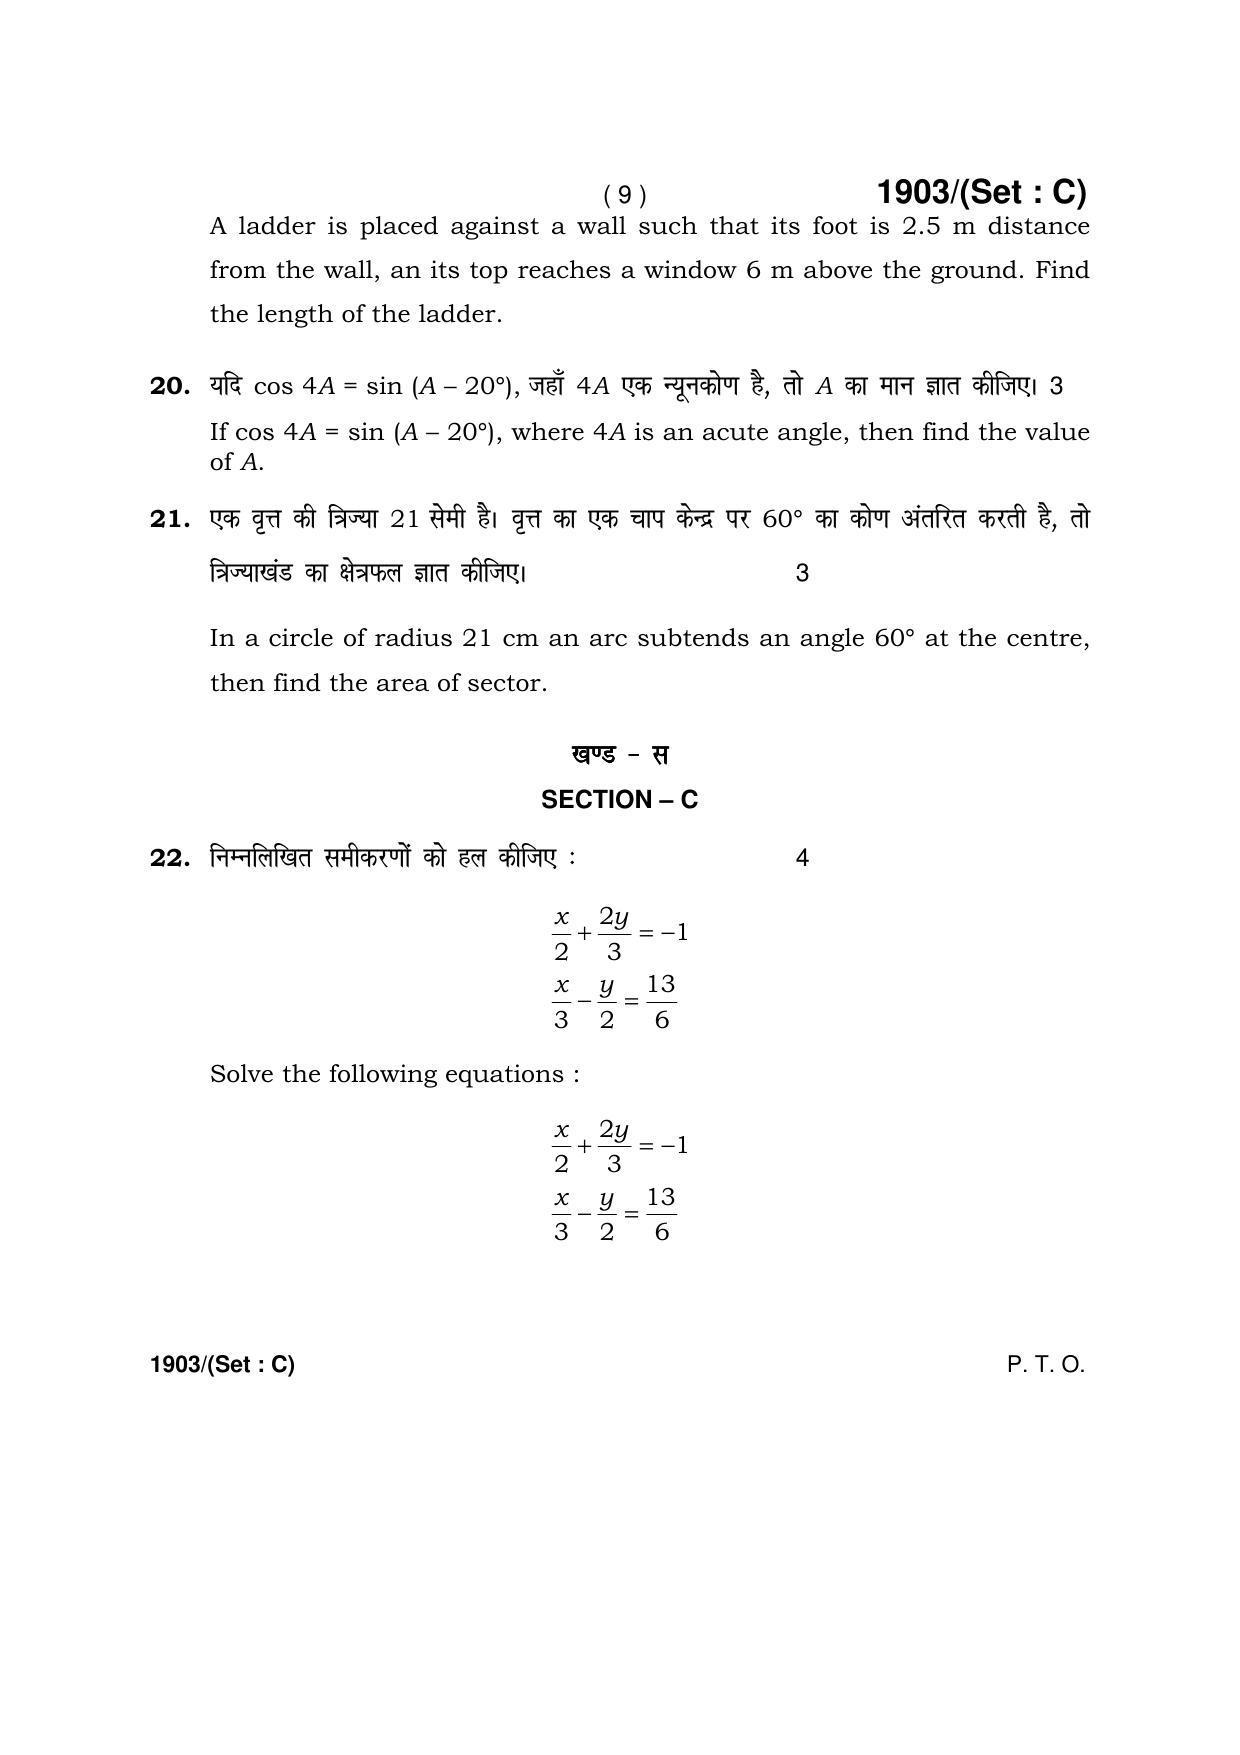 Haryana Board HBSE Class 10 Mathematics -C 2017 Question Paper - Page 9